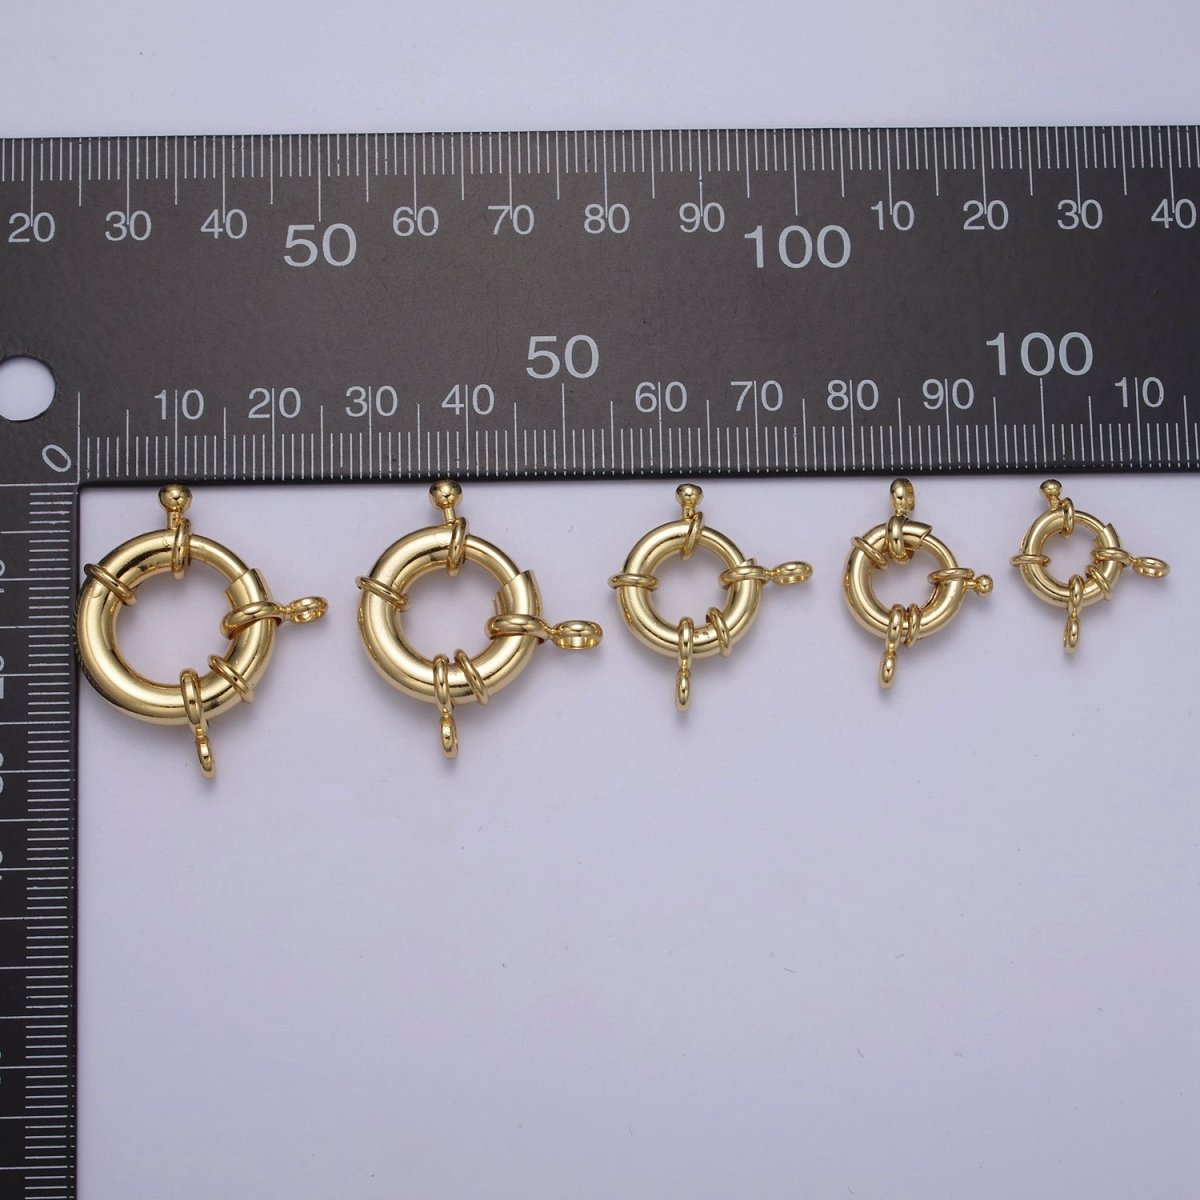 Sailor clasp, various sizes of 14K Gold Filled Wheel spring buckle for necklace bracelet jewelry Making Supply L-678 - DLUXCA